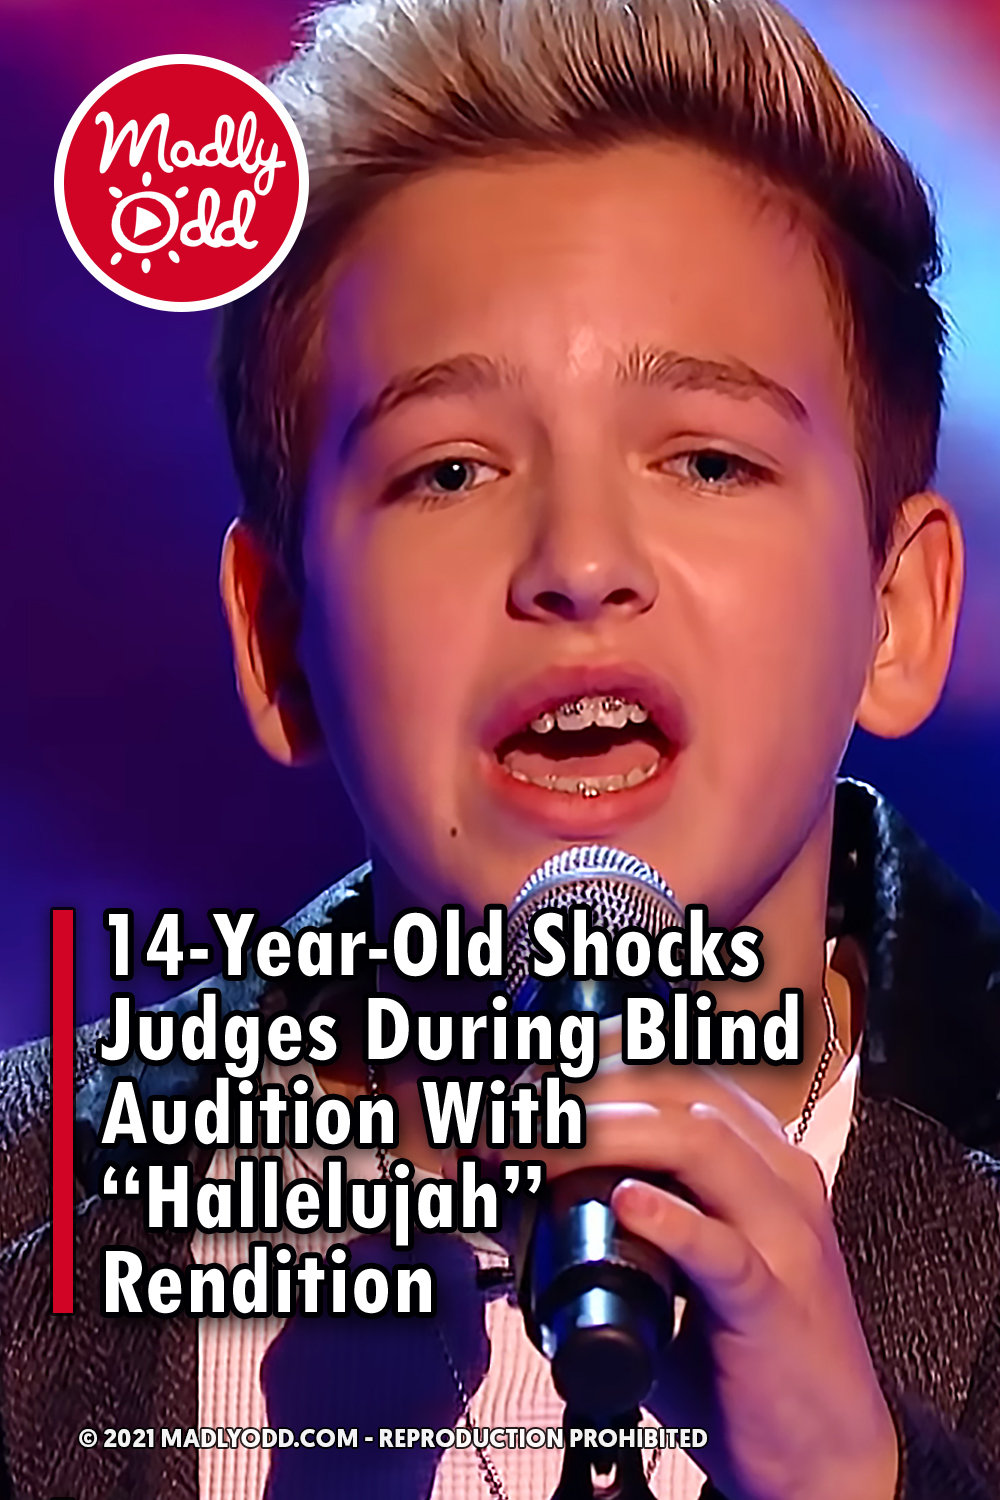 14-Year-Old Shocks Judges During Blind Audition With “Hallelujah” Rendition